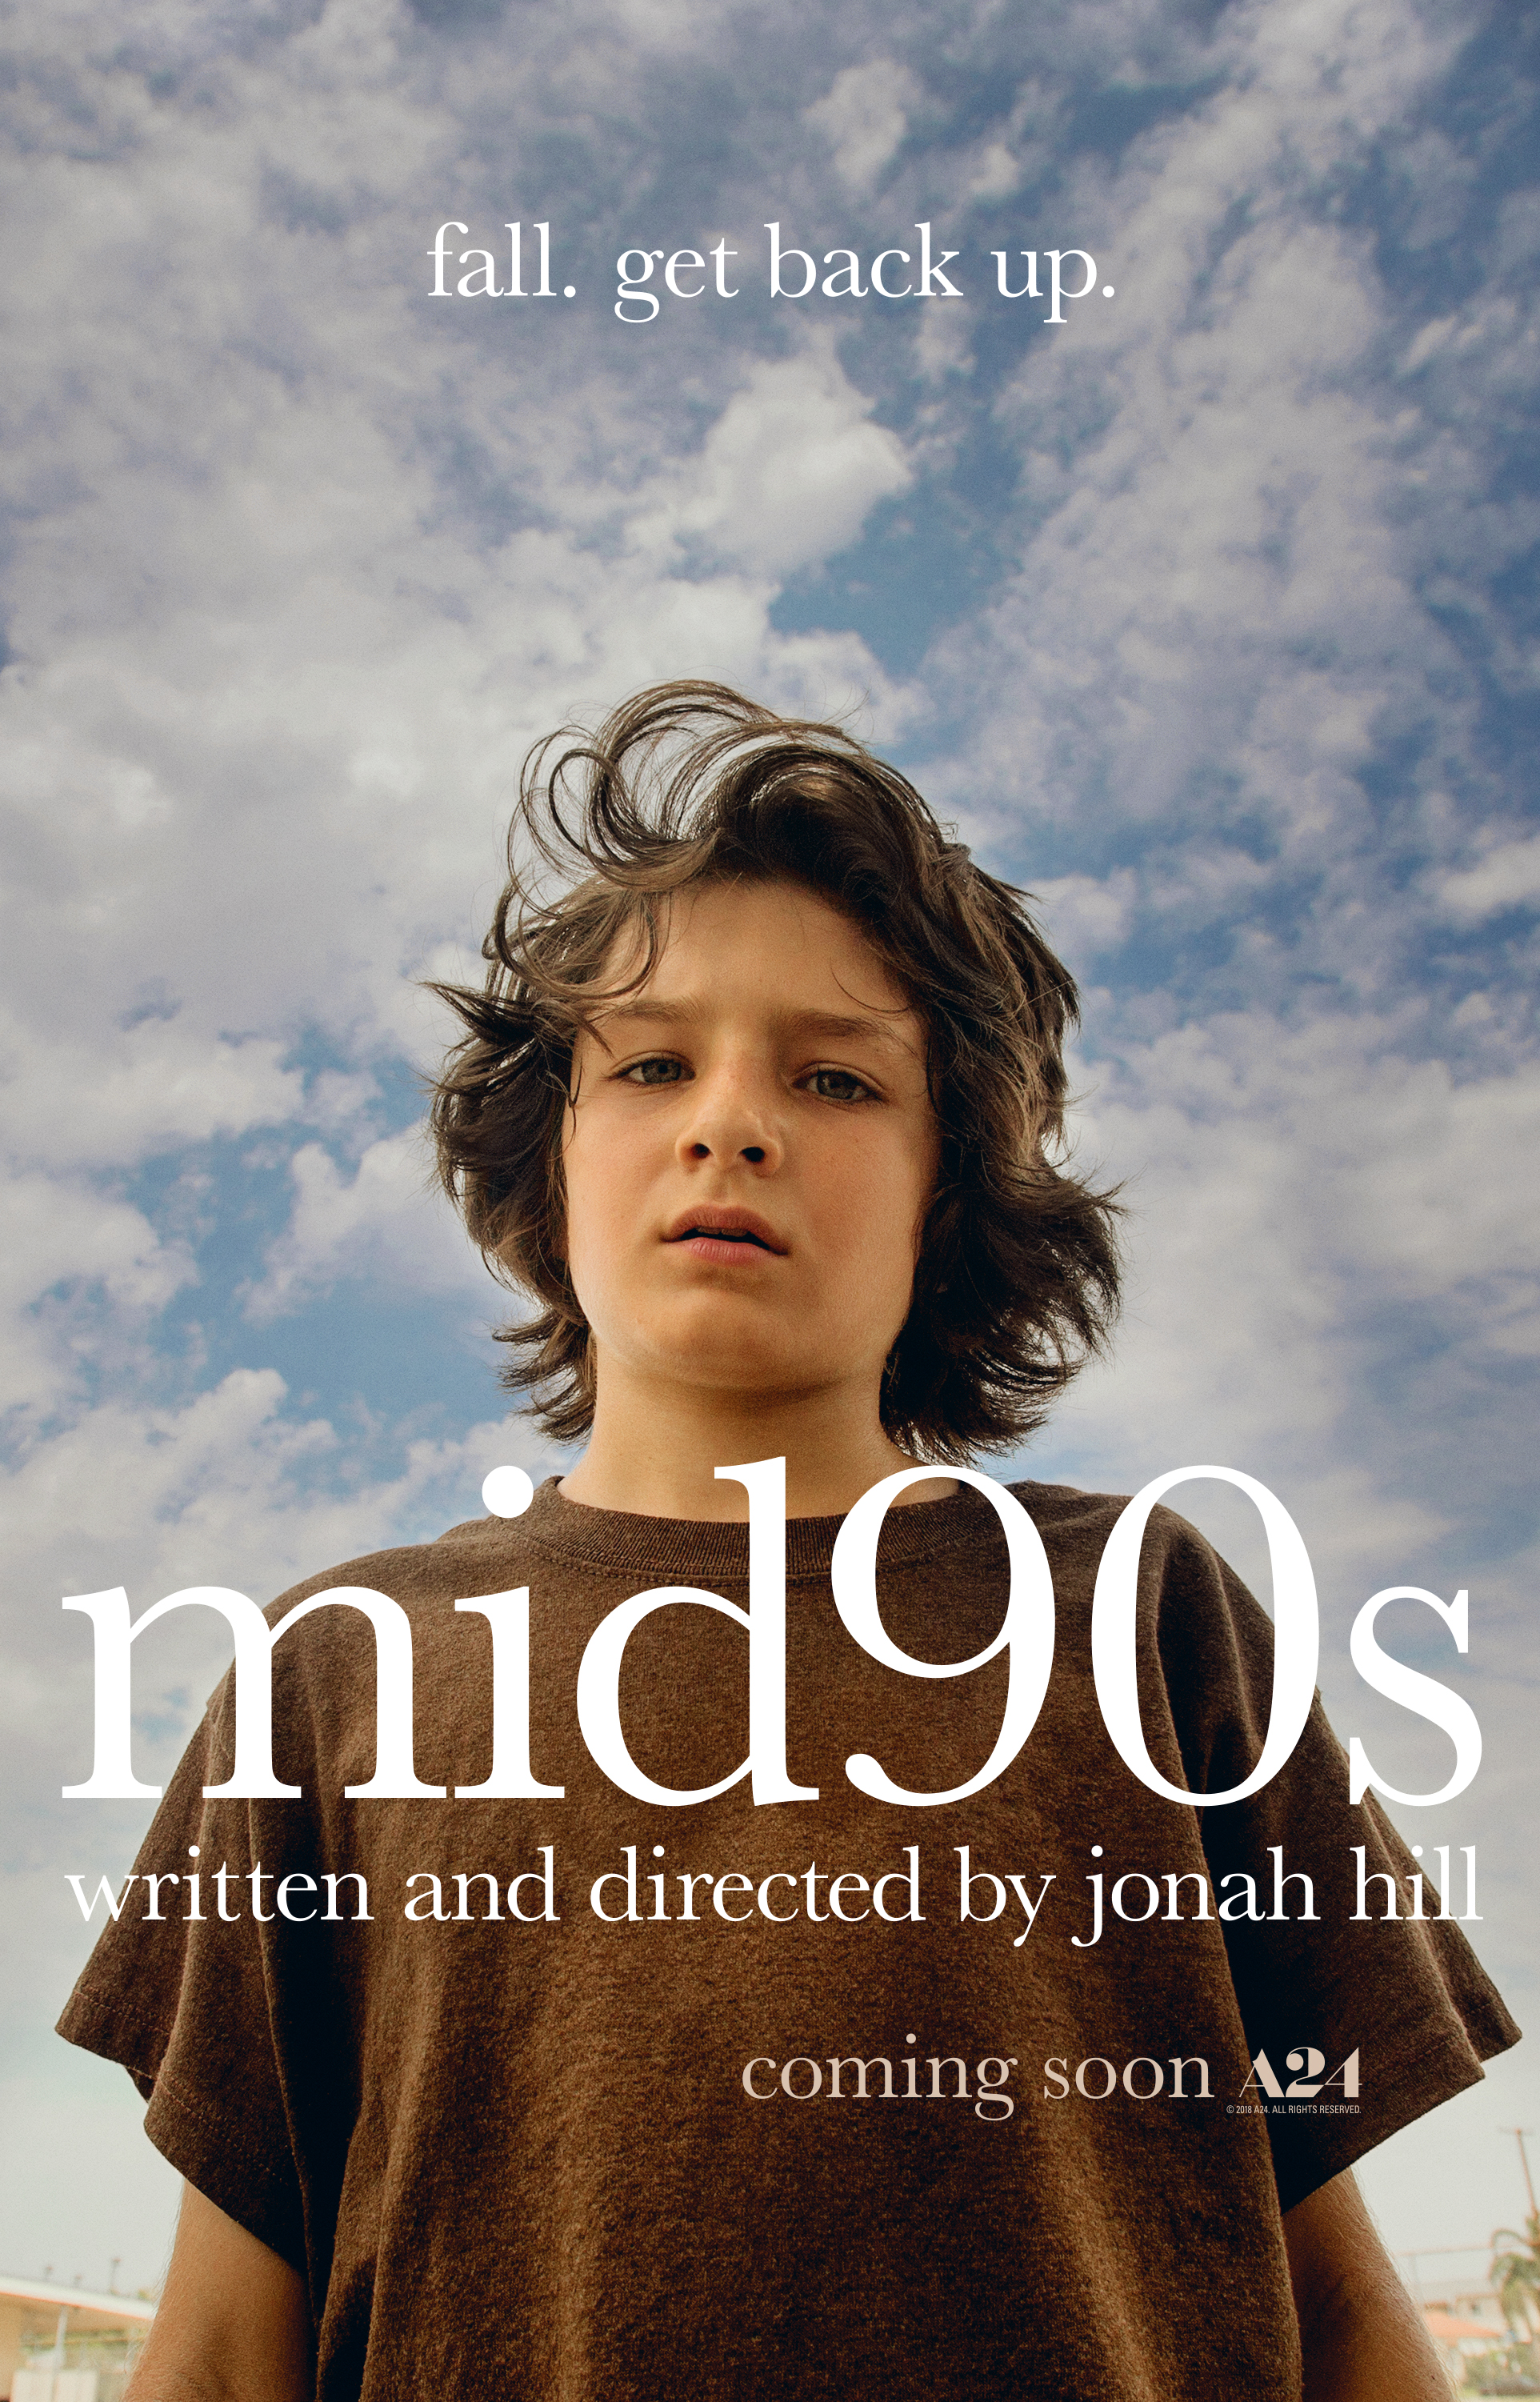 Mid90s – Comedy-Drama Film Marks Jonah Hill’s Directorial Debut!